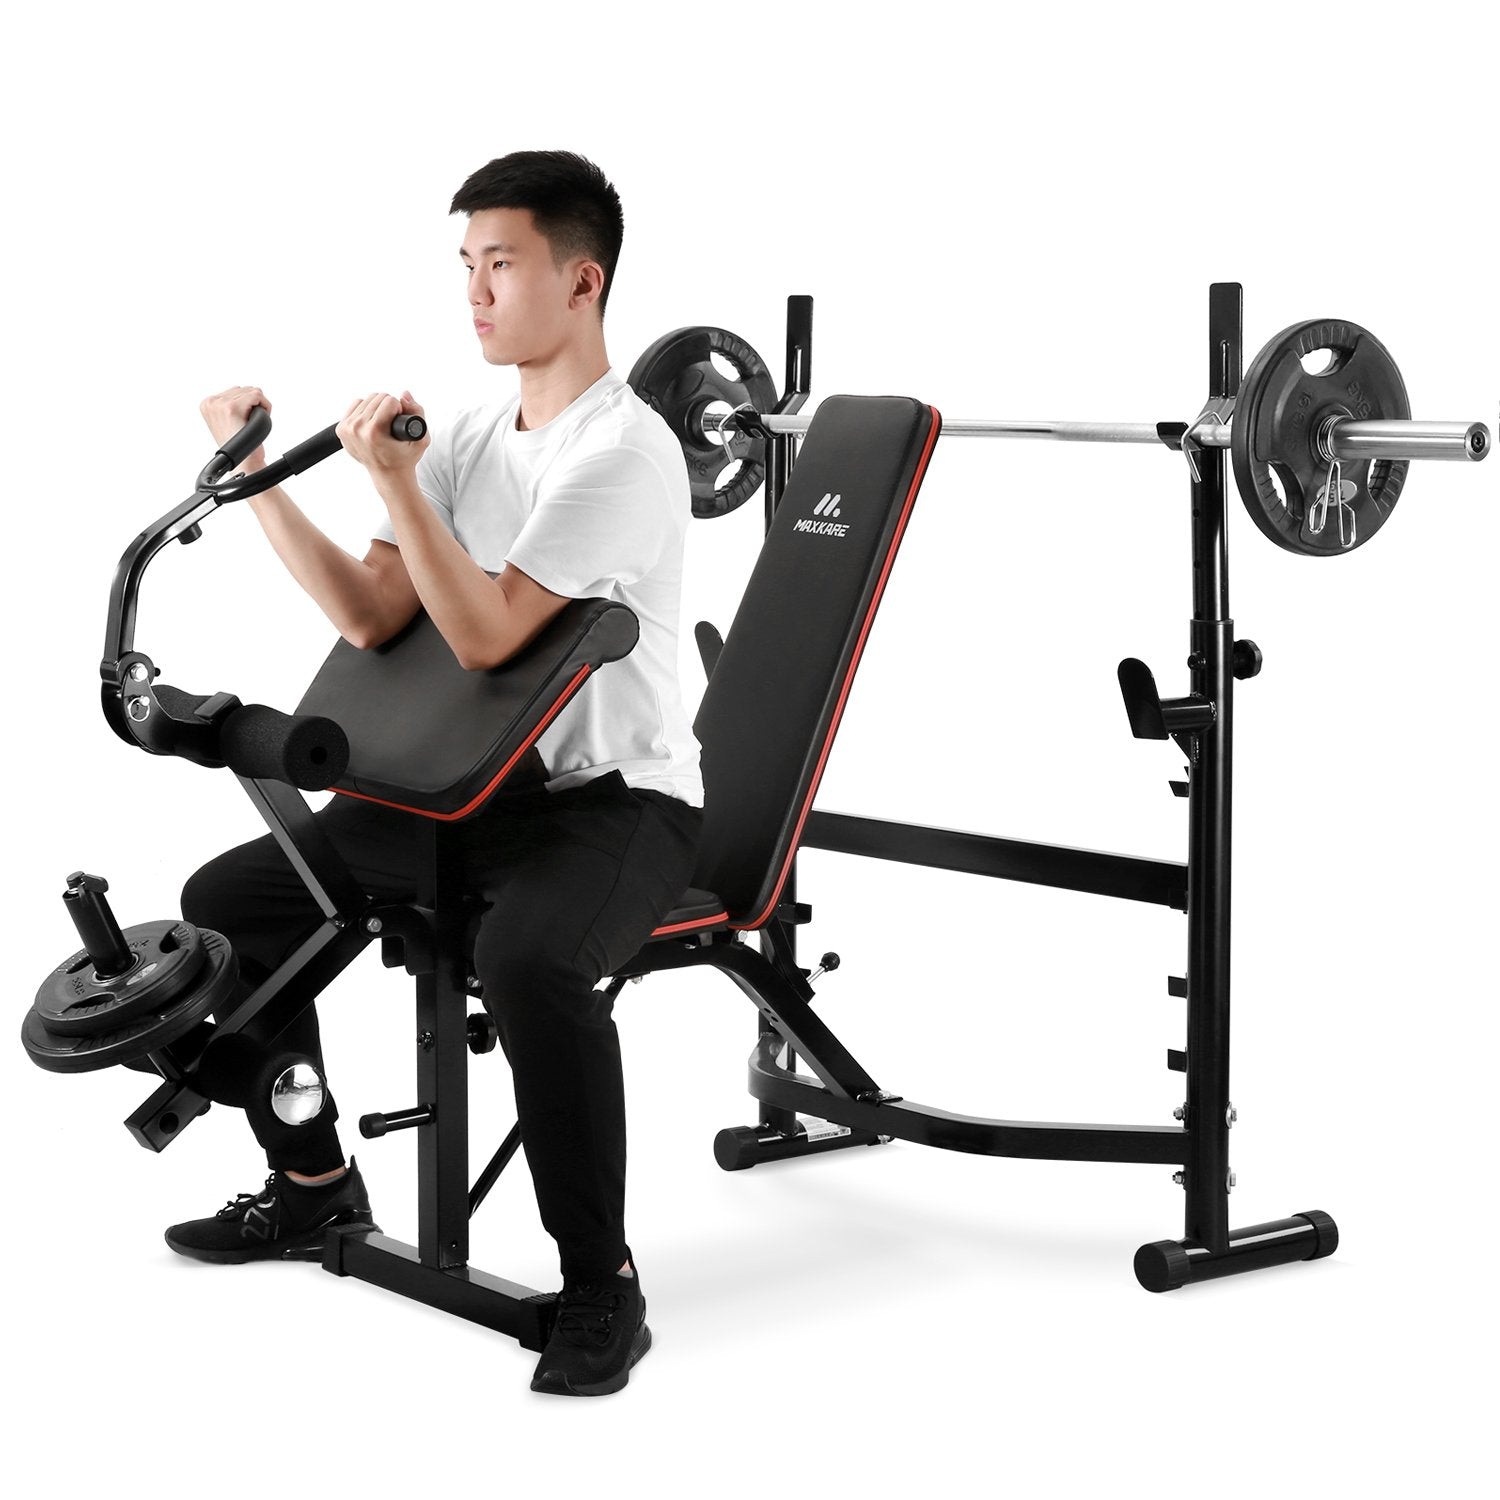 Load image into Gallery viewer, Olympic Weight Bench Adjustable Workout Bench Weight-Lifting Bed Exercise Bench with Squat Rack Leg Extension Preacher Curl Bench for Full Body Workout Strength Training Equipment for Home Gym
